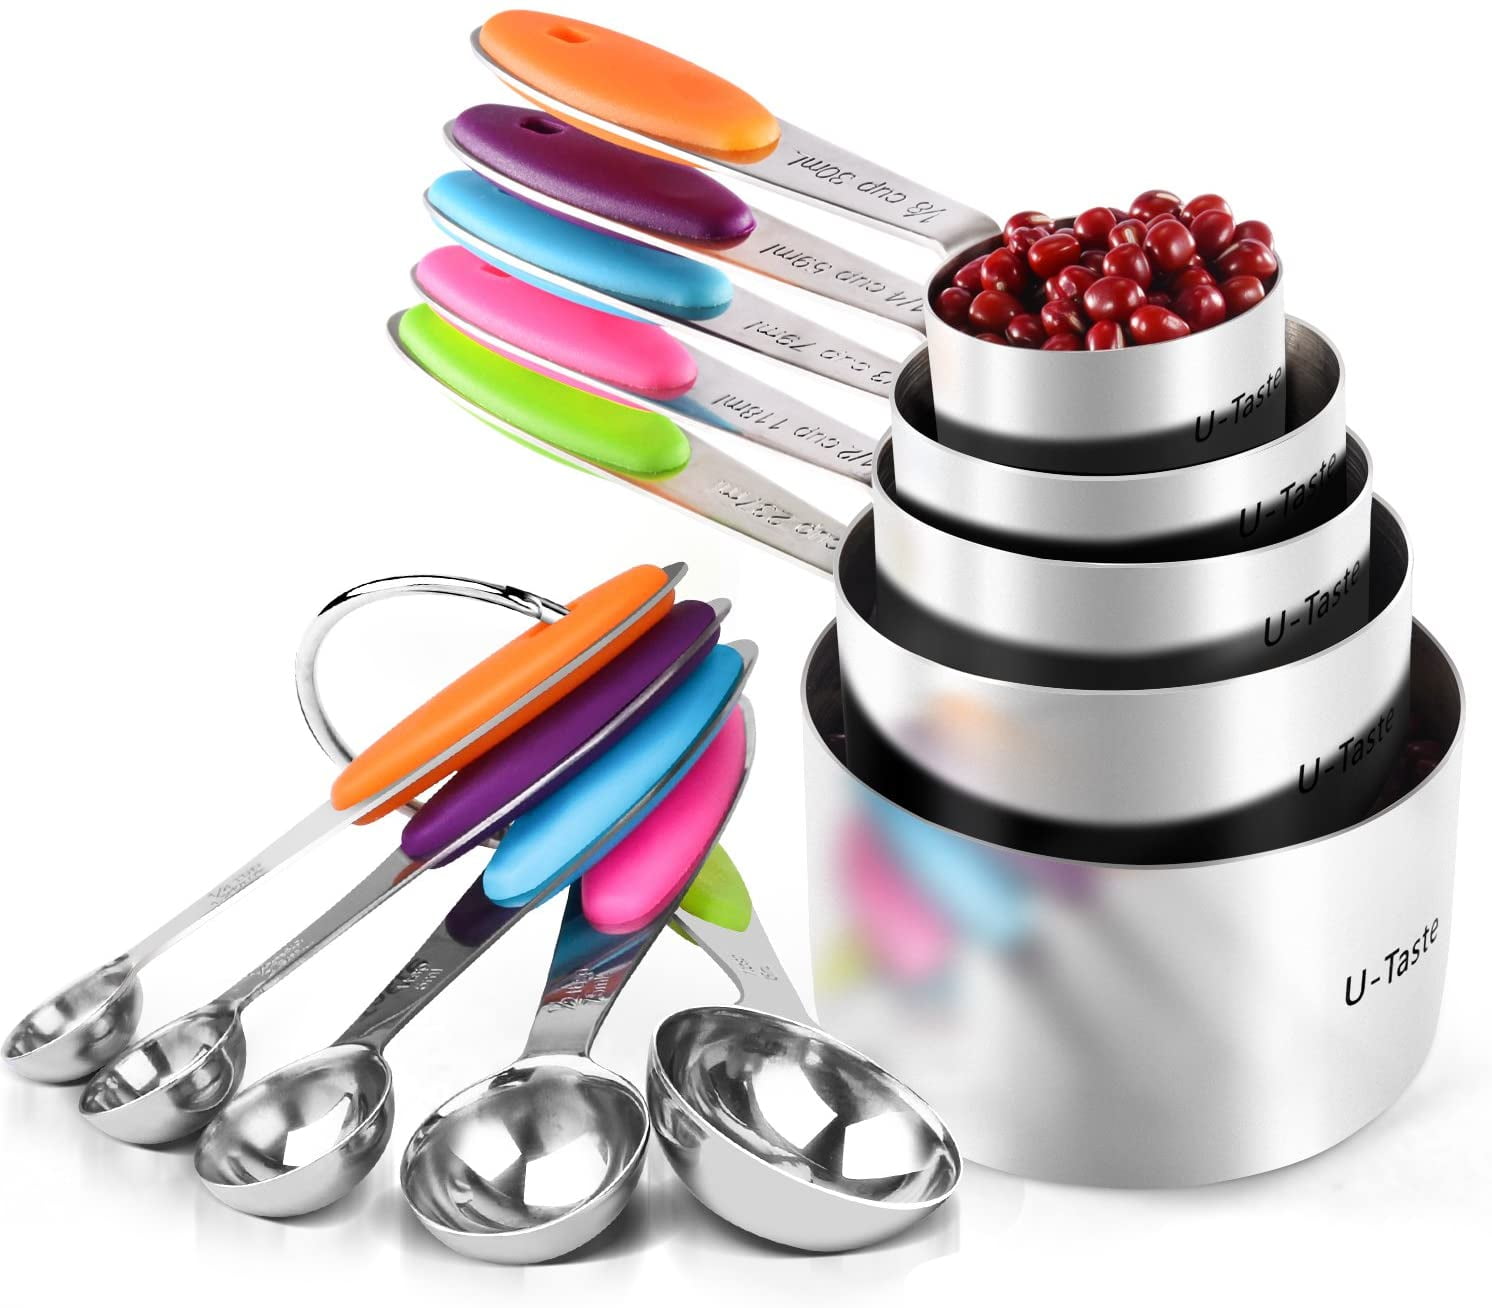 Nutrichef NCMMS8 6-Piece Magnetic Measuring Spoon Set